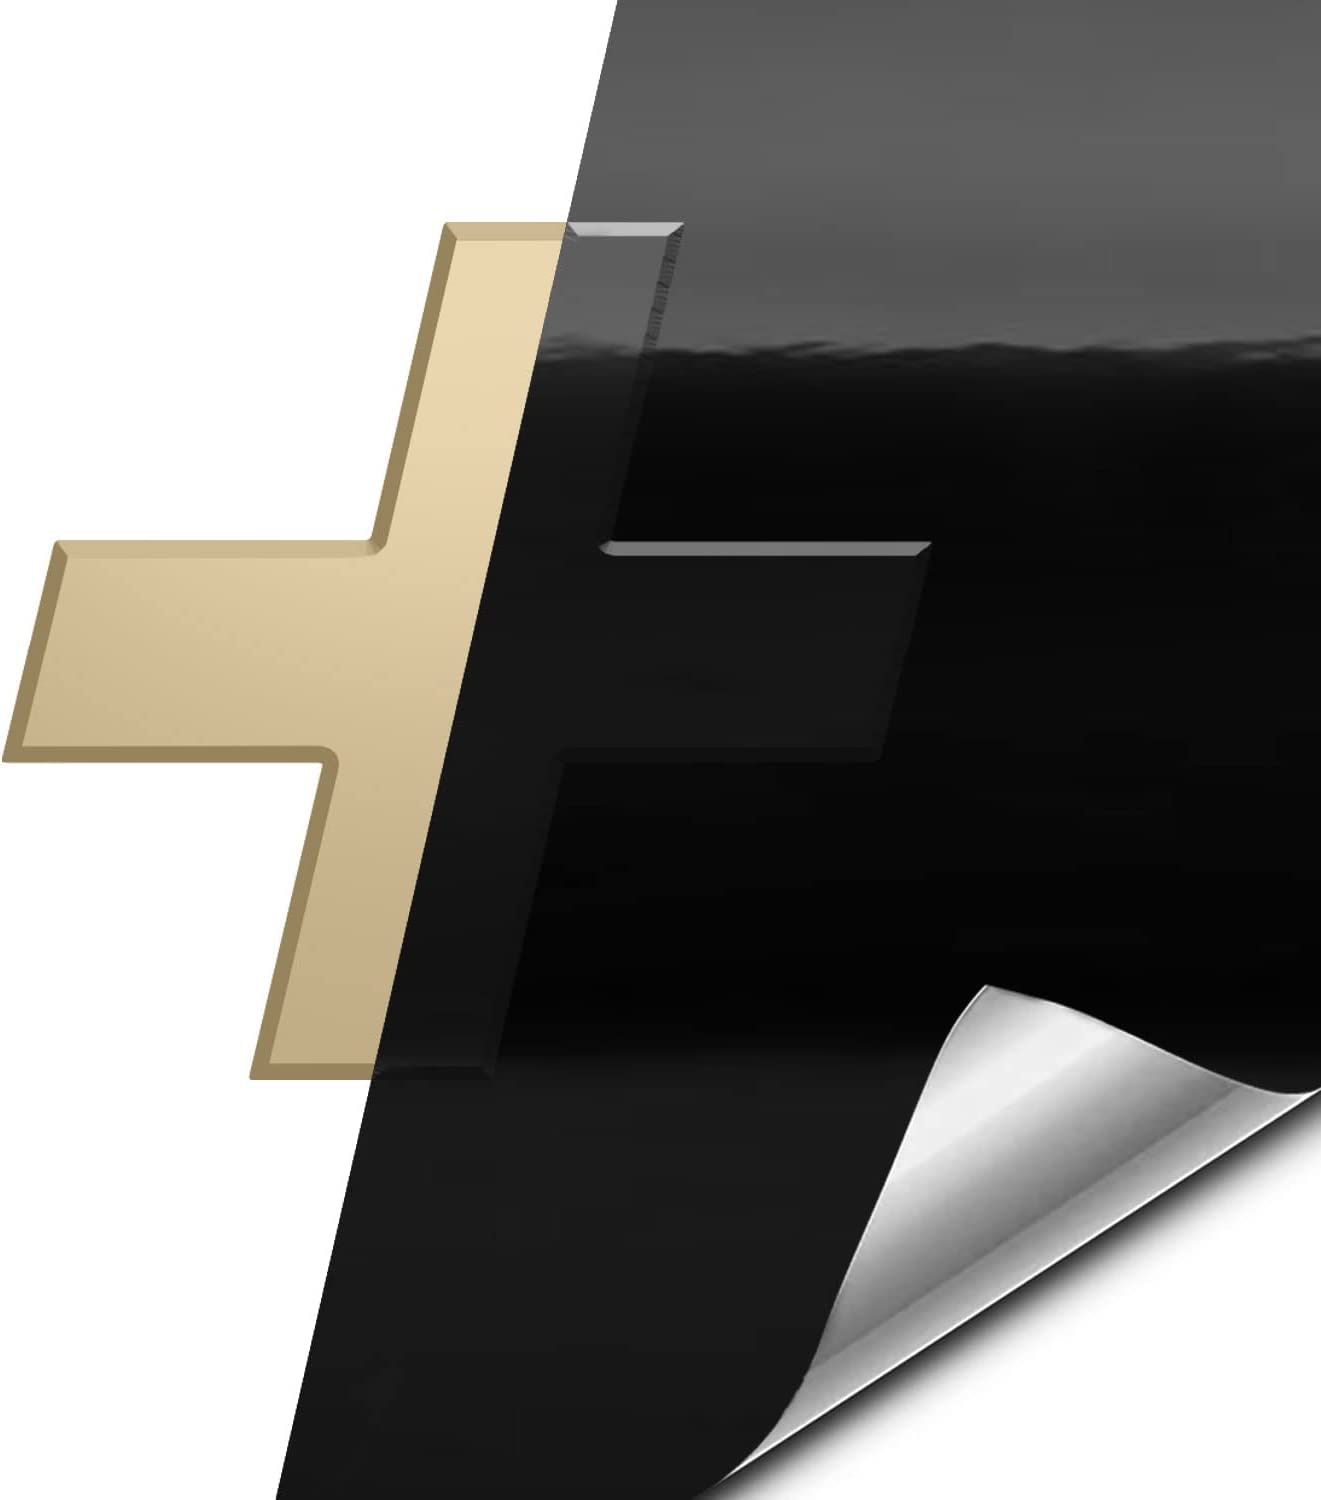 VViViD Auto Emblem Vinyl Wrap, Gloss Black, Compatible with Chevy Bowtie Logo, 11.8 Inches x 4 Inches Sheets (x2)